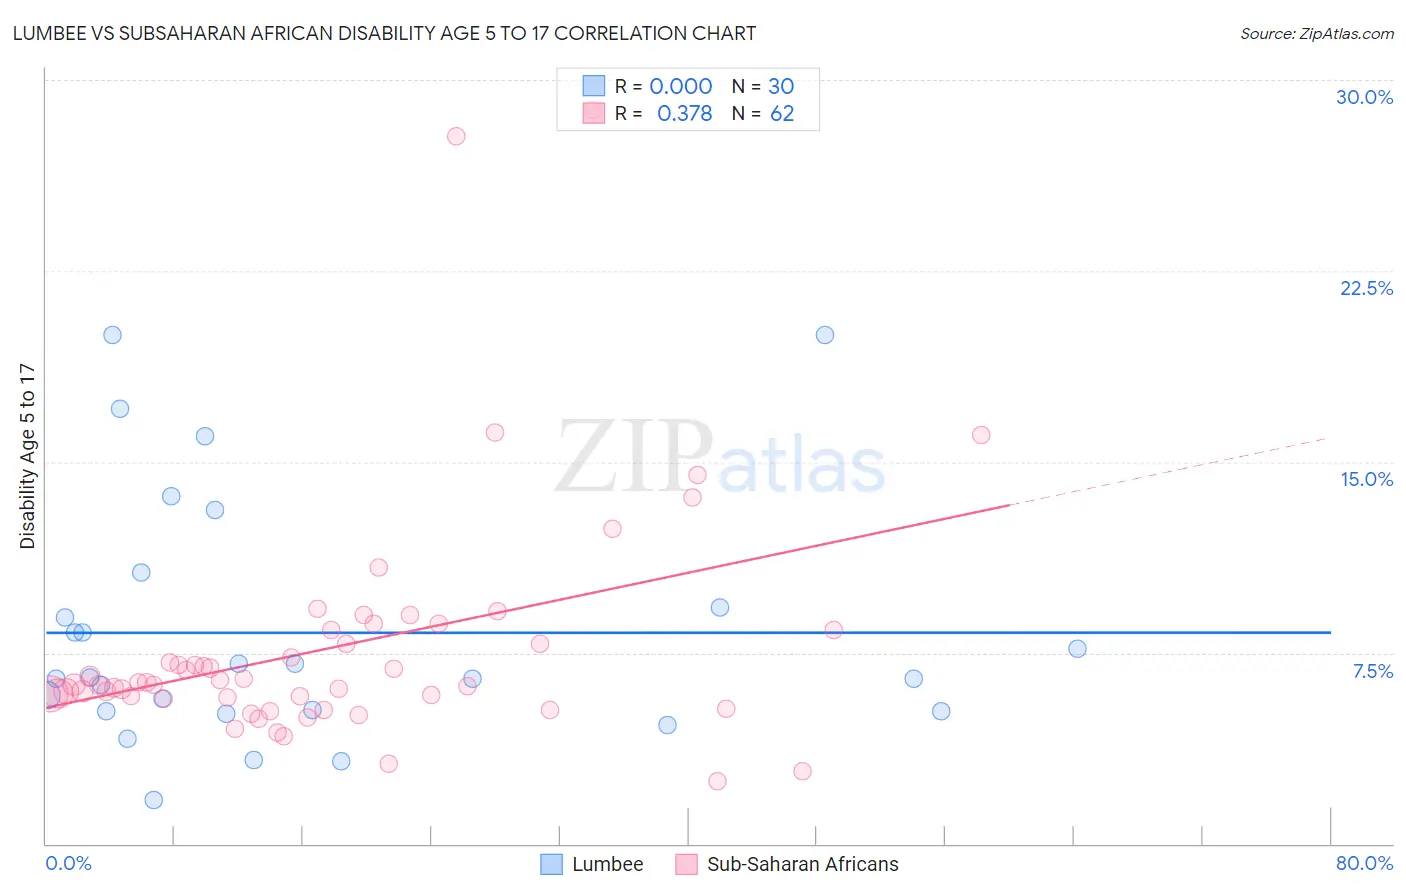 Lumbee vs Subsaharan African Disability Age 5 to 17